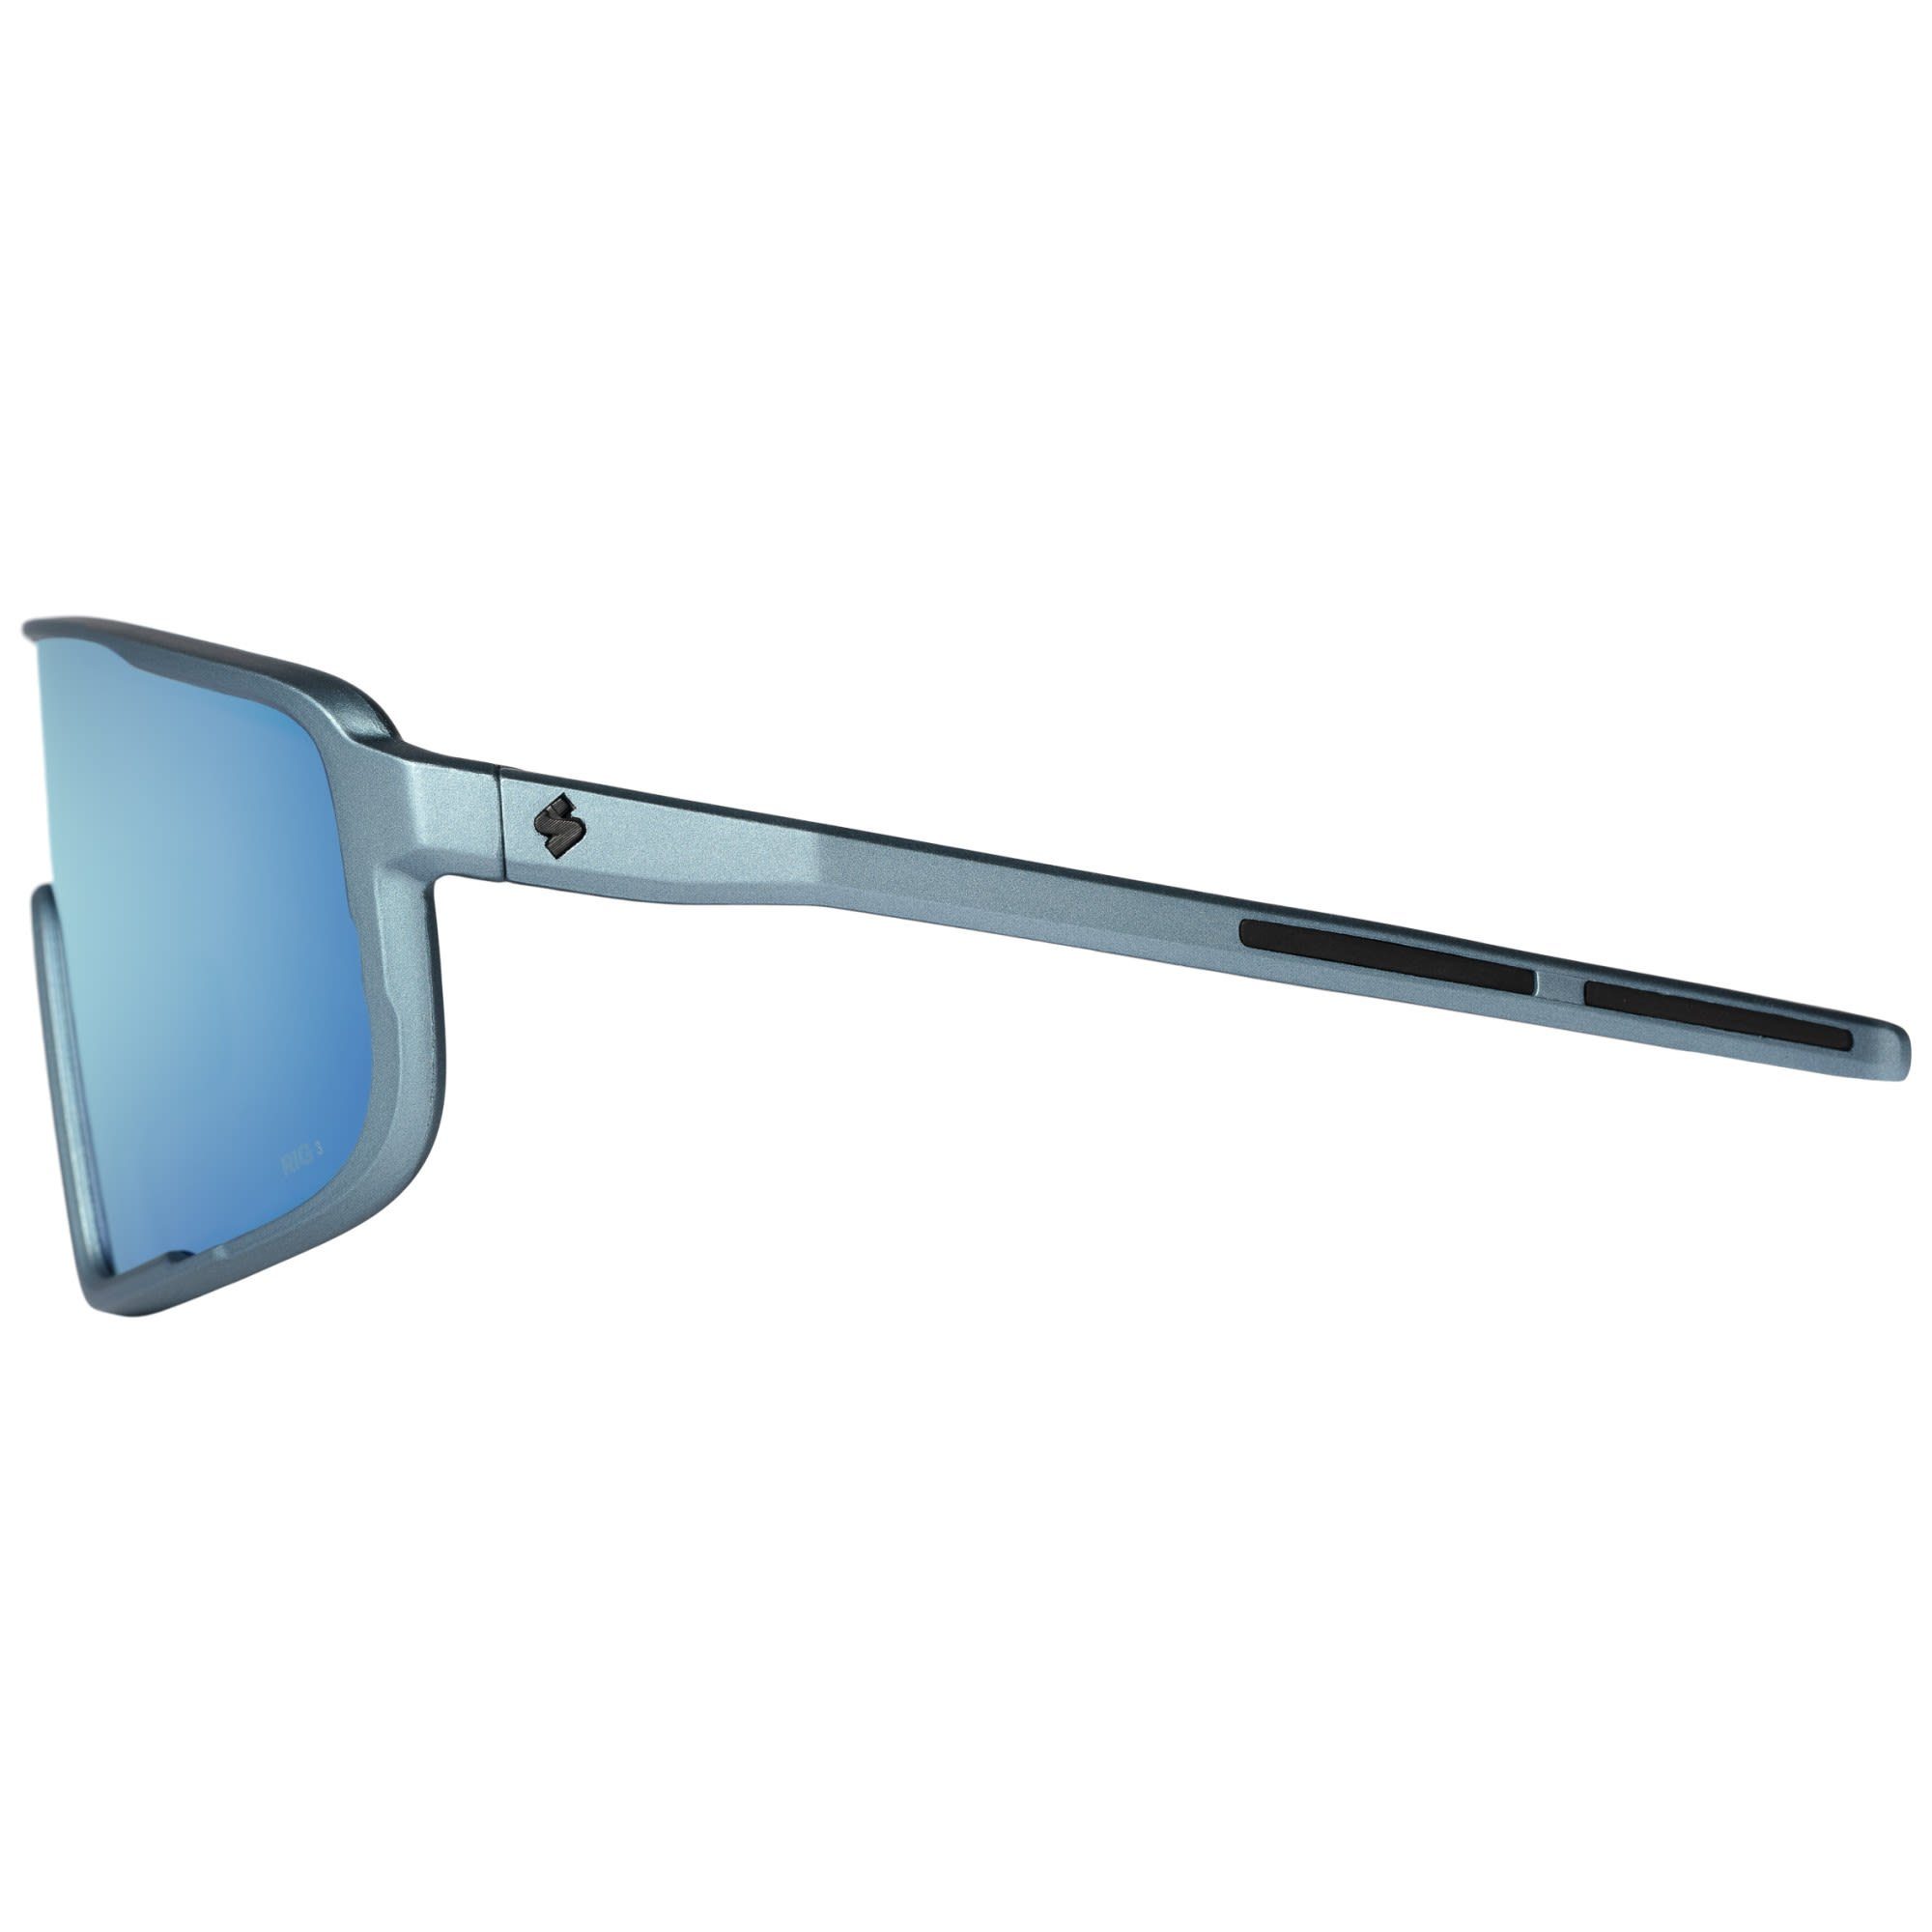 Reflect Sweet - Protection Sportbrille Memento Metallic Aquamarine Flare Rig Accessoires Sweet RIG Protection